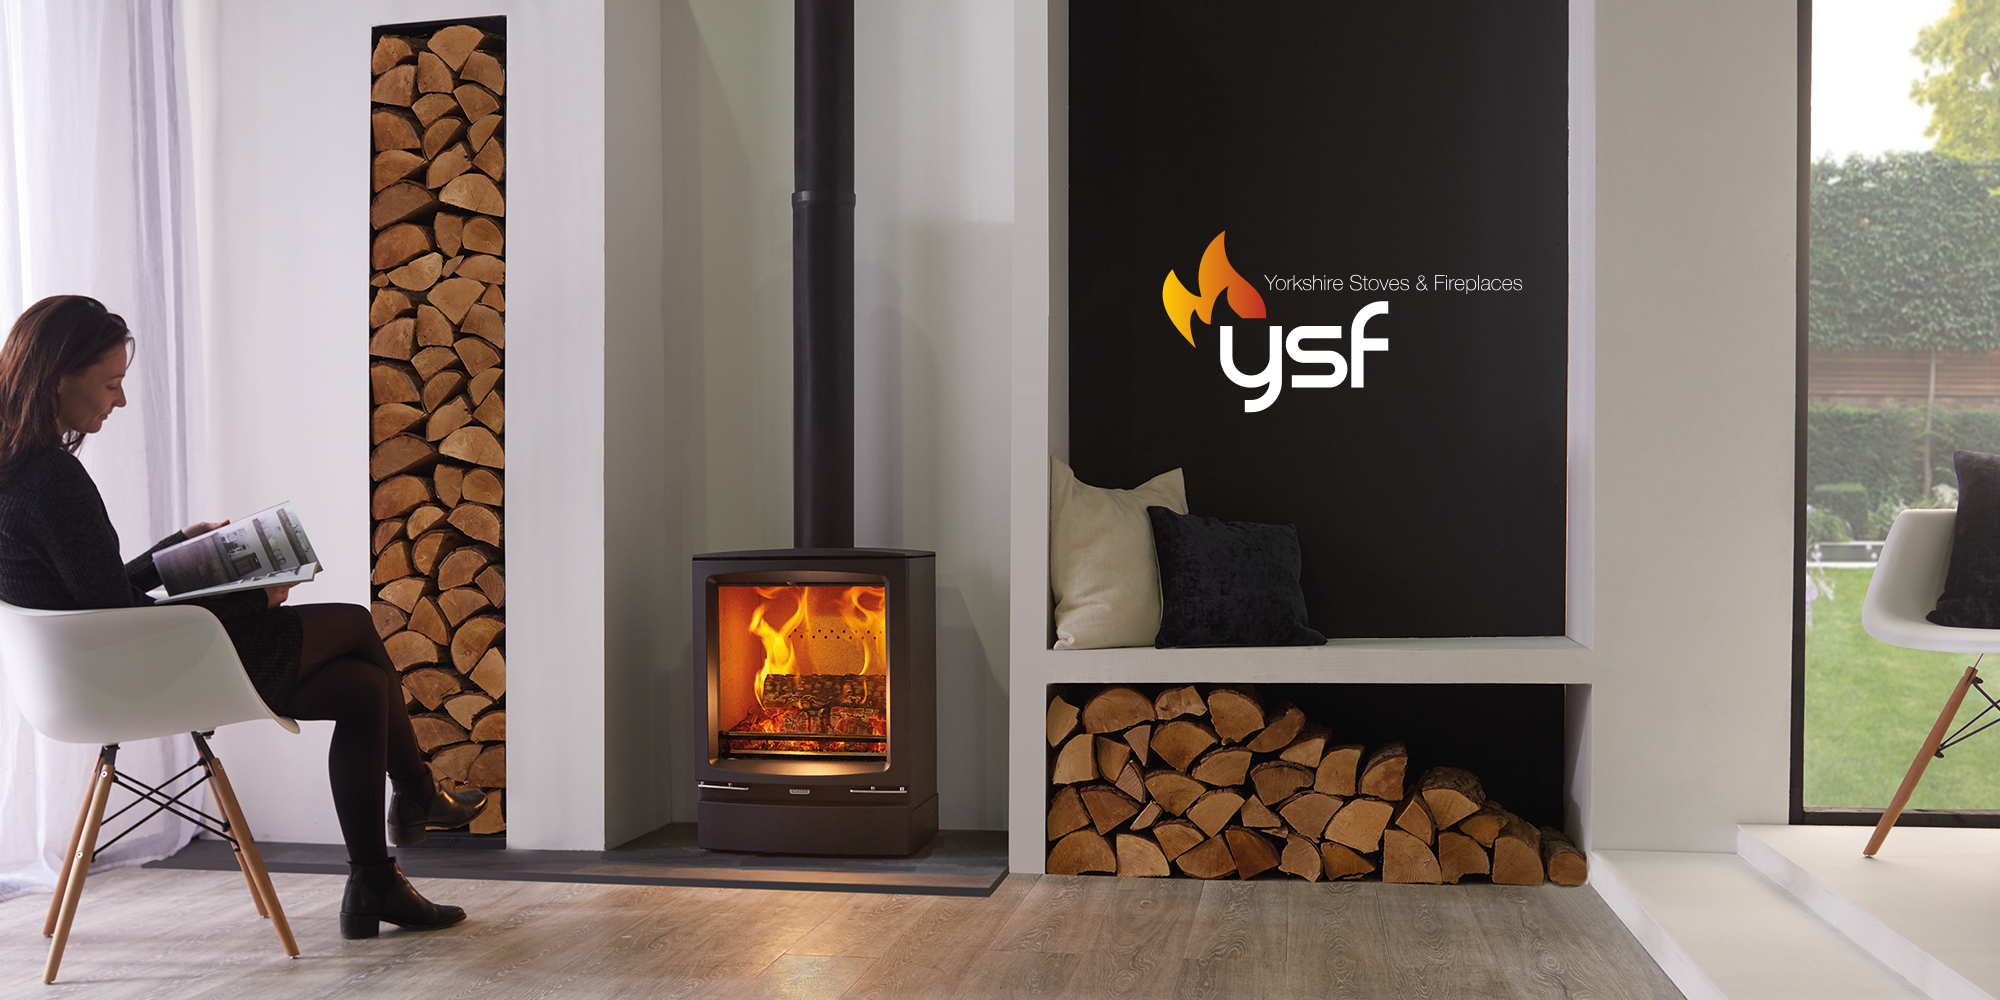 A fireplace with the YSF logo